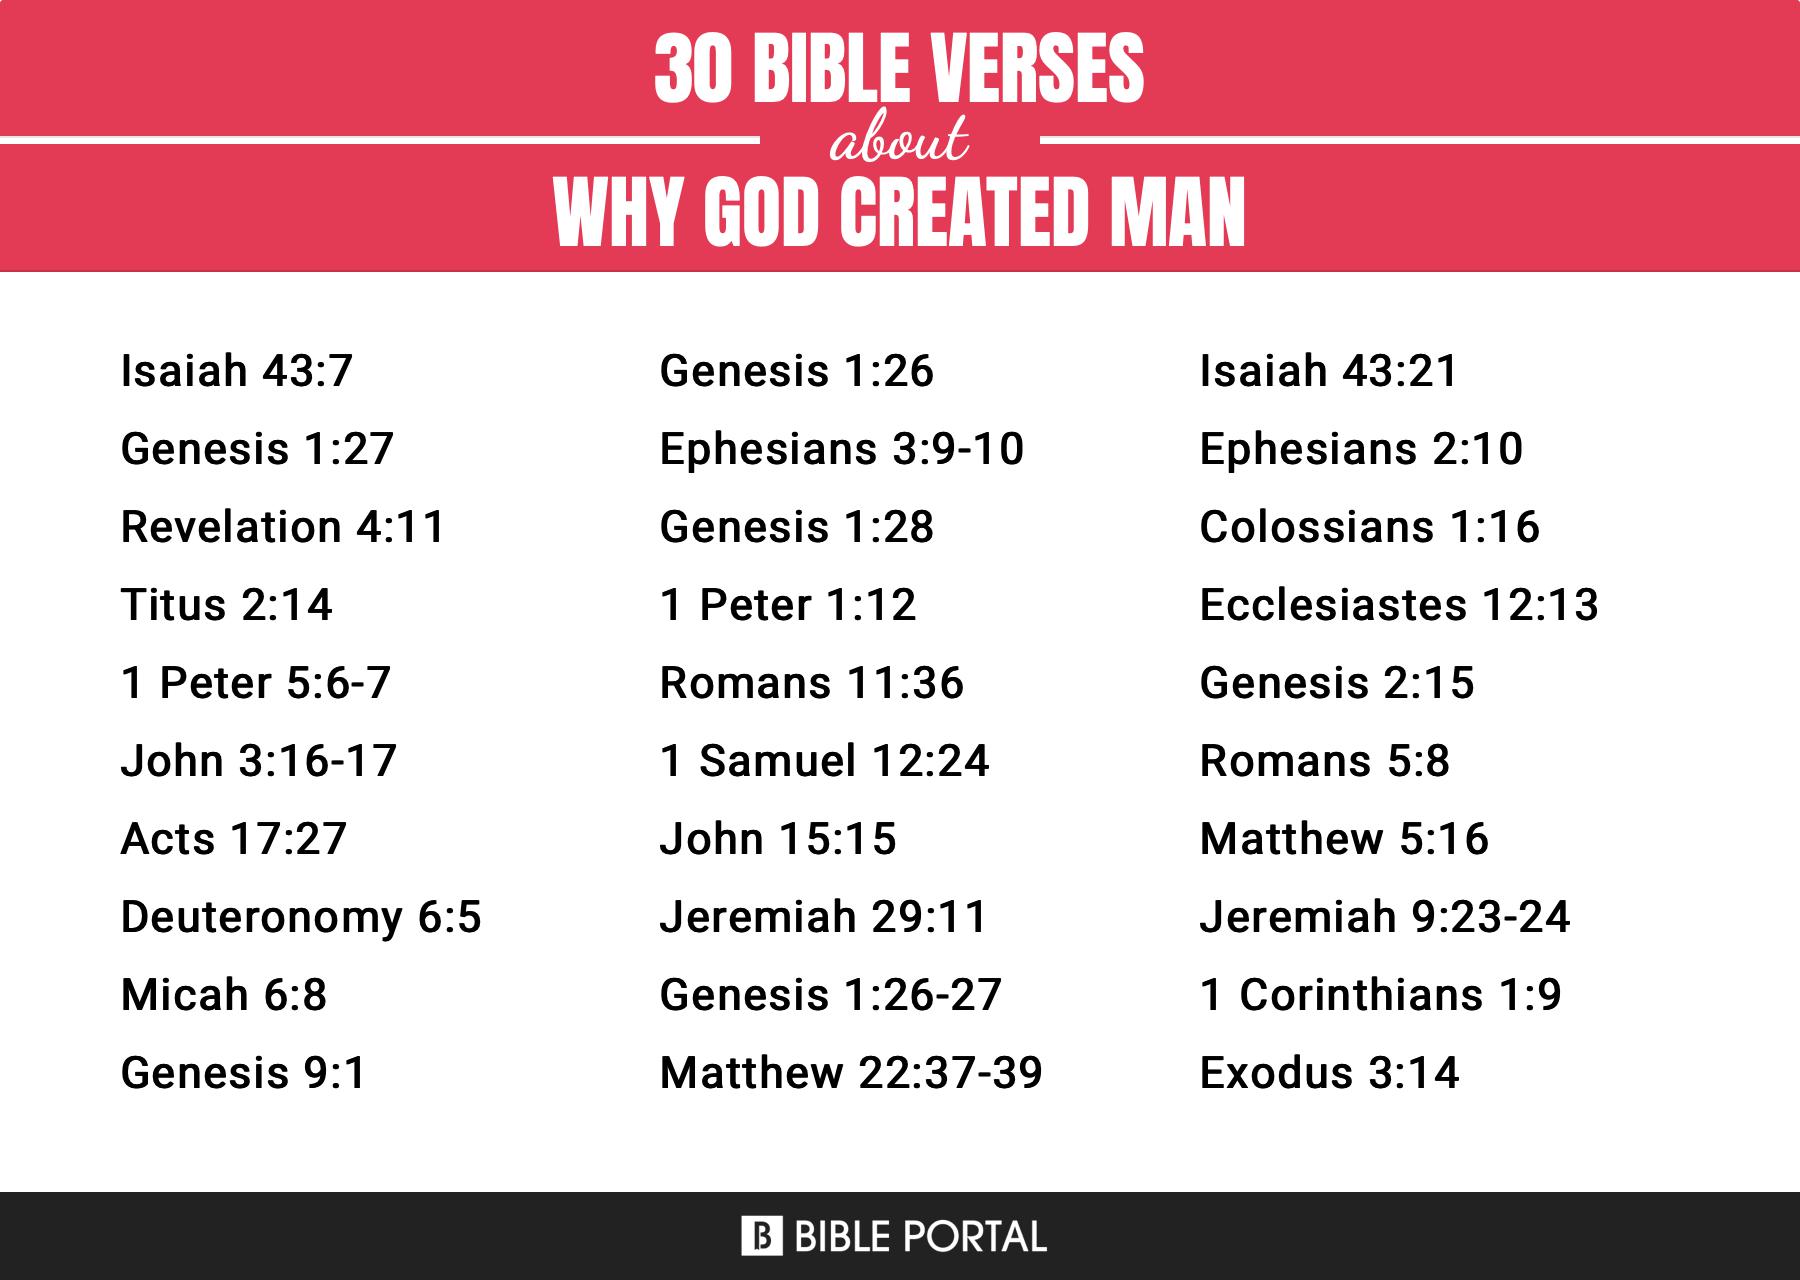 85 Bible Verses About Why God Created Man